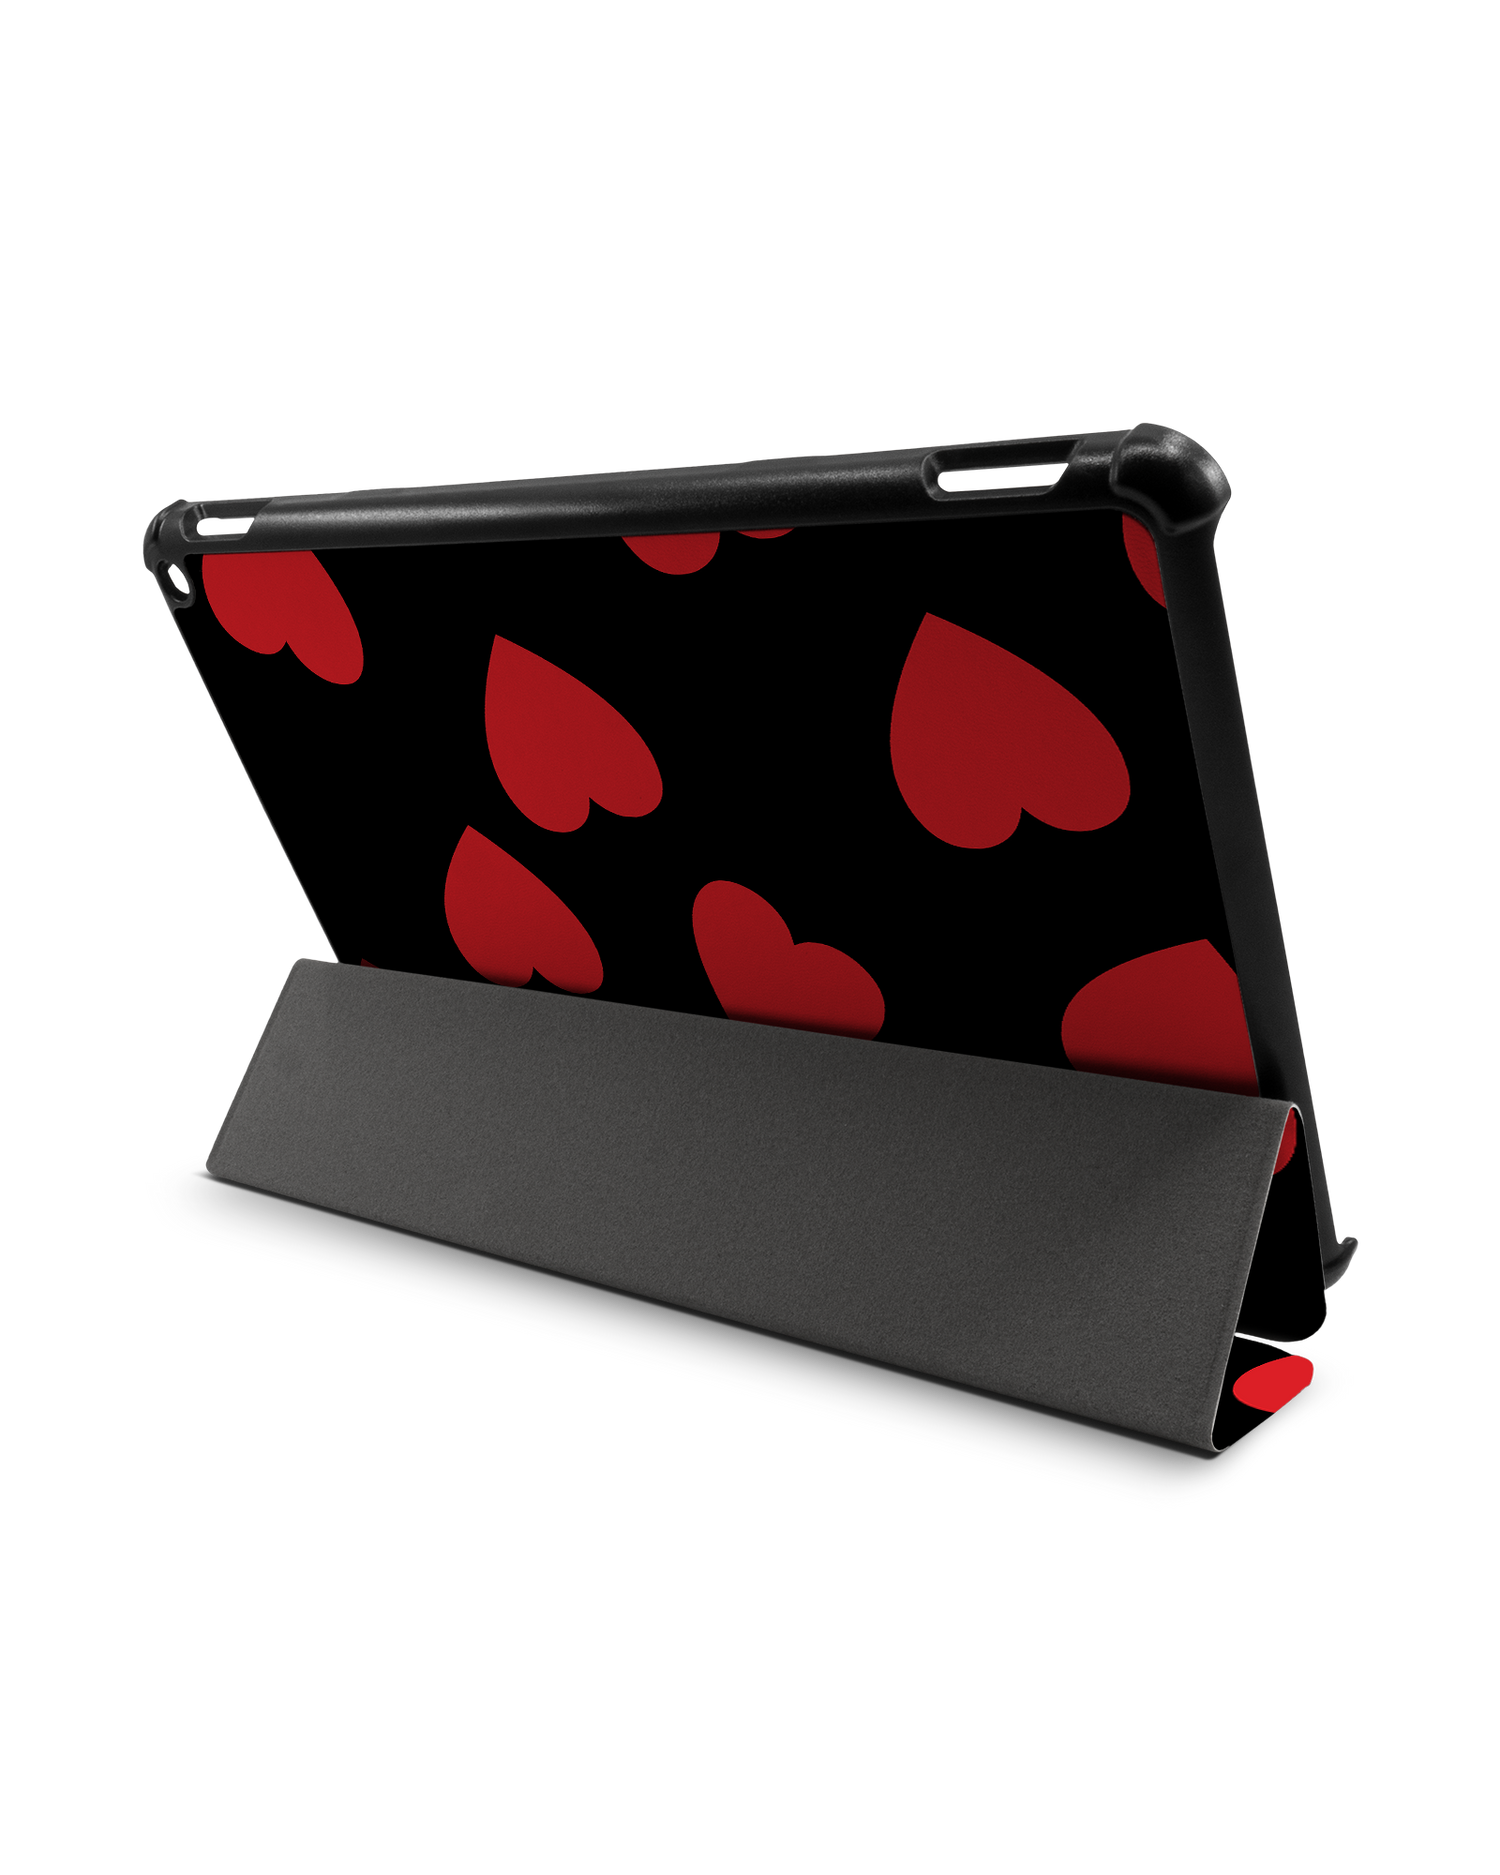 Repeating Hearts Tablet Smart Case for Amazon Fire HD 10 (2021): Used as Stand